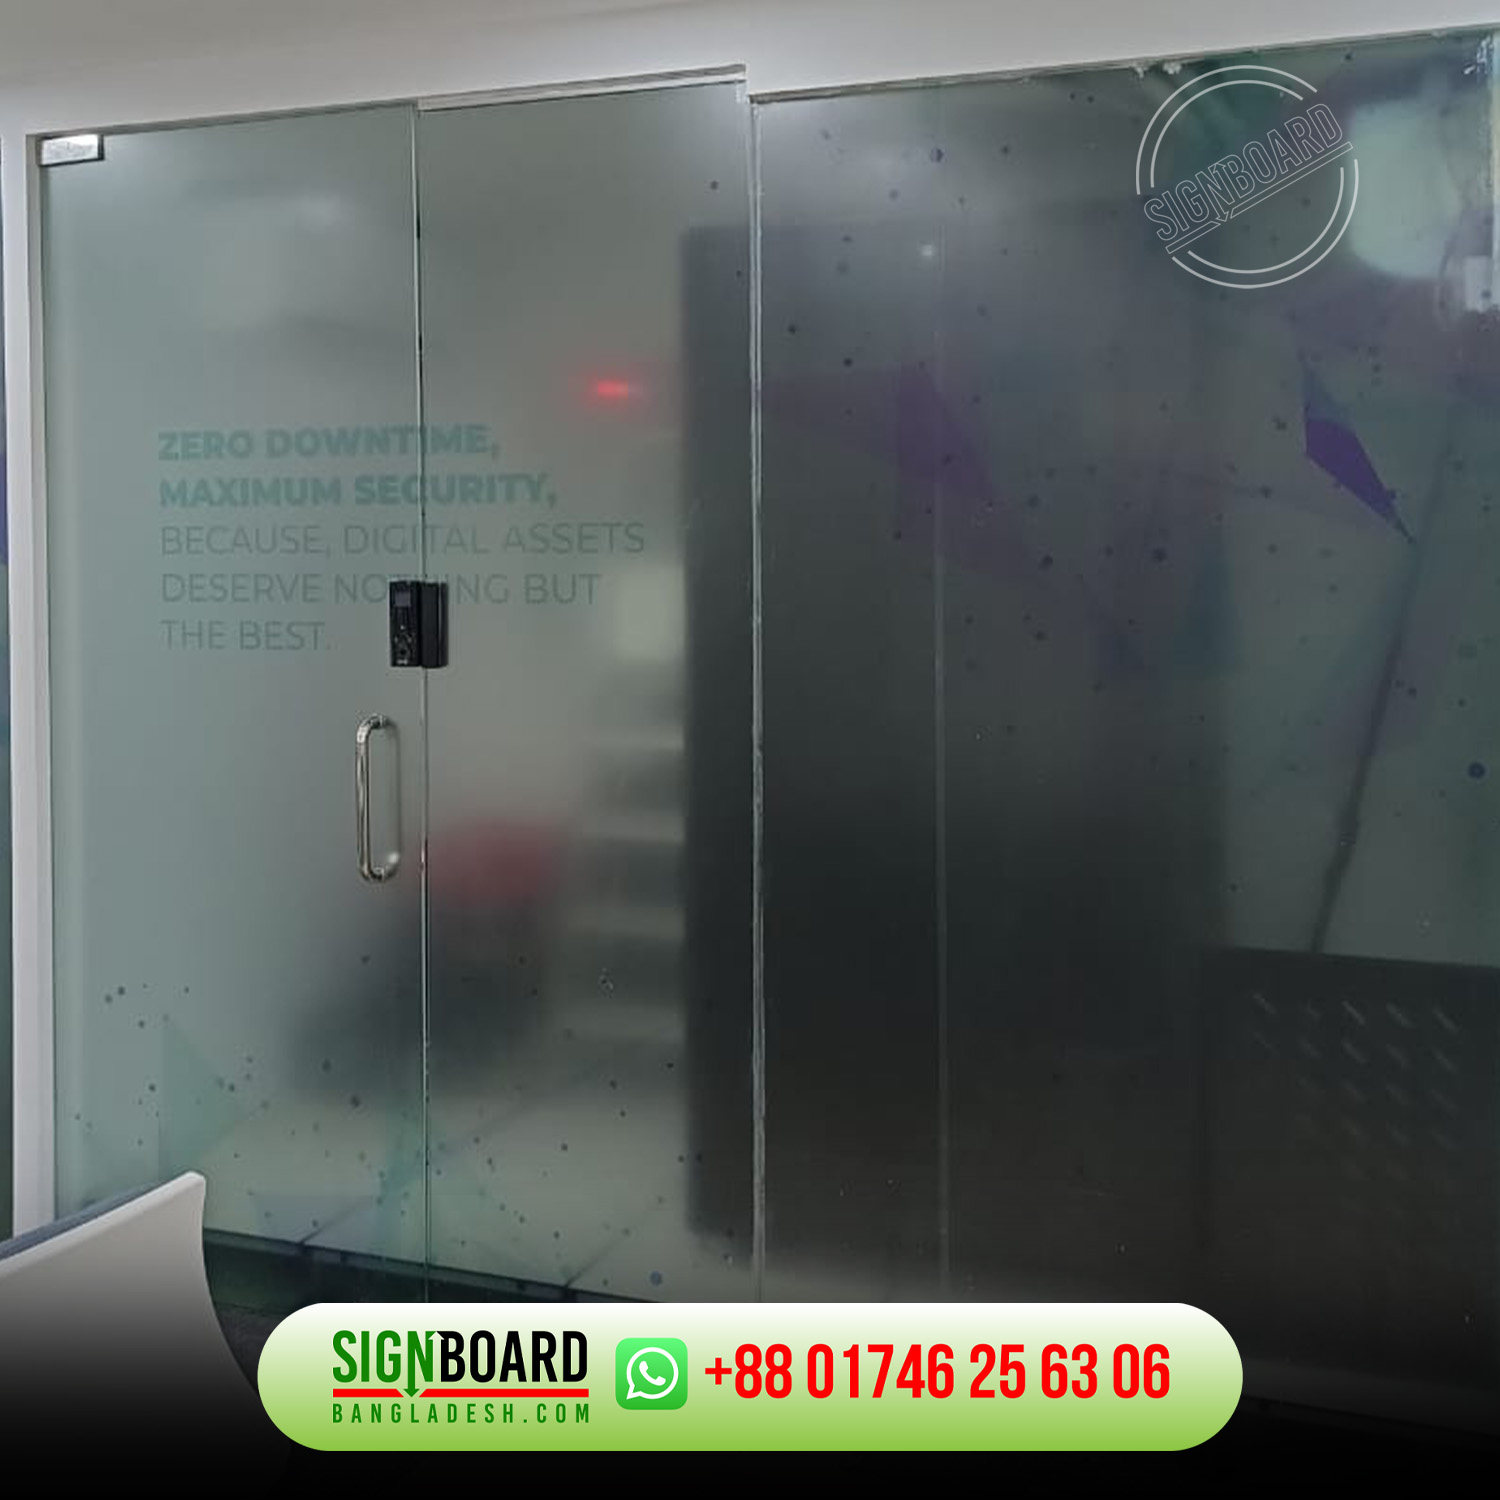 Office Frosted Glass Sticker Design Printing Supplier Dhaka Bangladesh